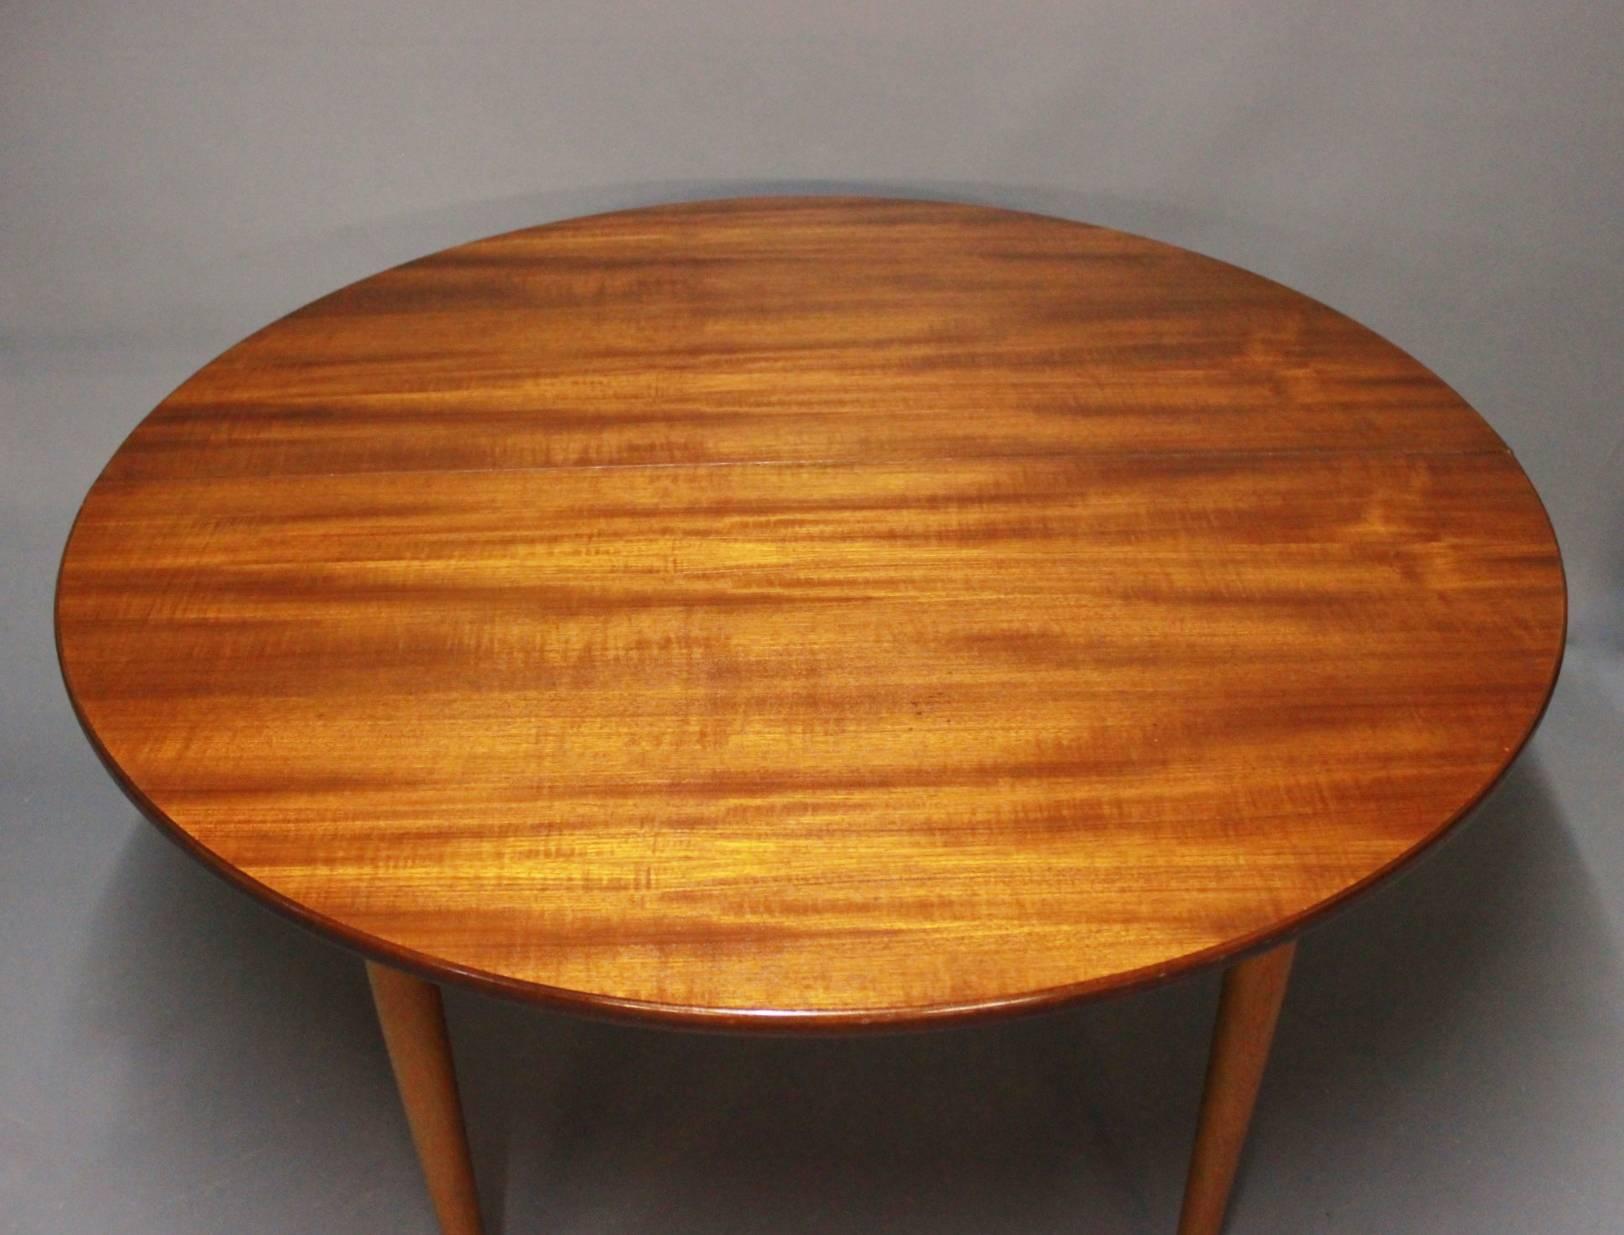 Round dining table with extensions in teak and legs of oak designed by Hans J. Wegner and from the 1960s. The table is in great vintage condition.